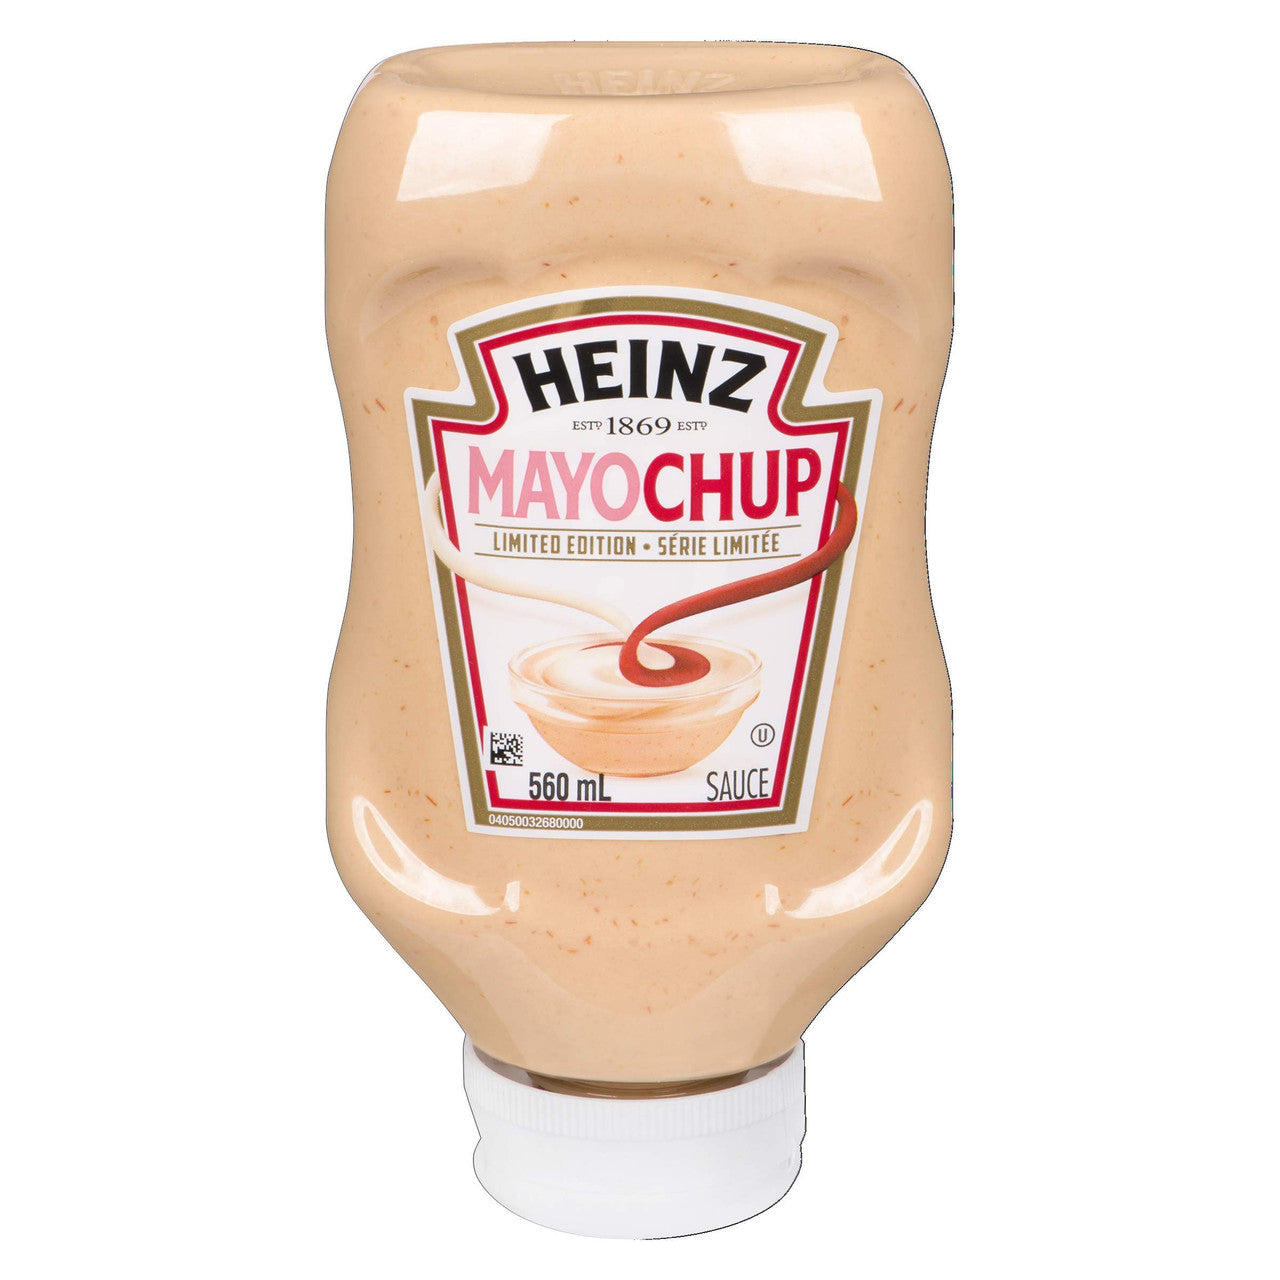 Heinz Mayochup Sauce, 560mL/18.9oz. Bottle, 8 Count, (Imported from Canada)